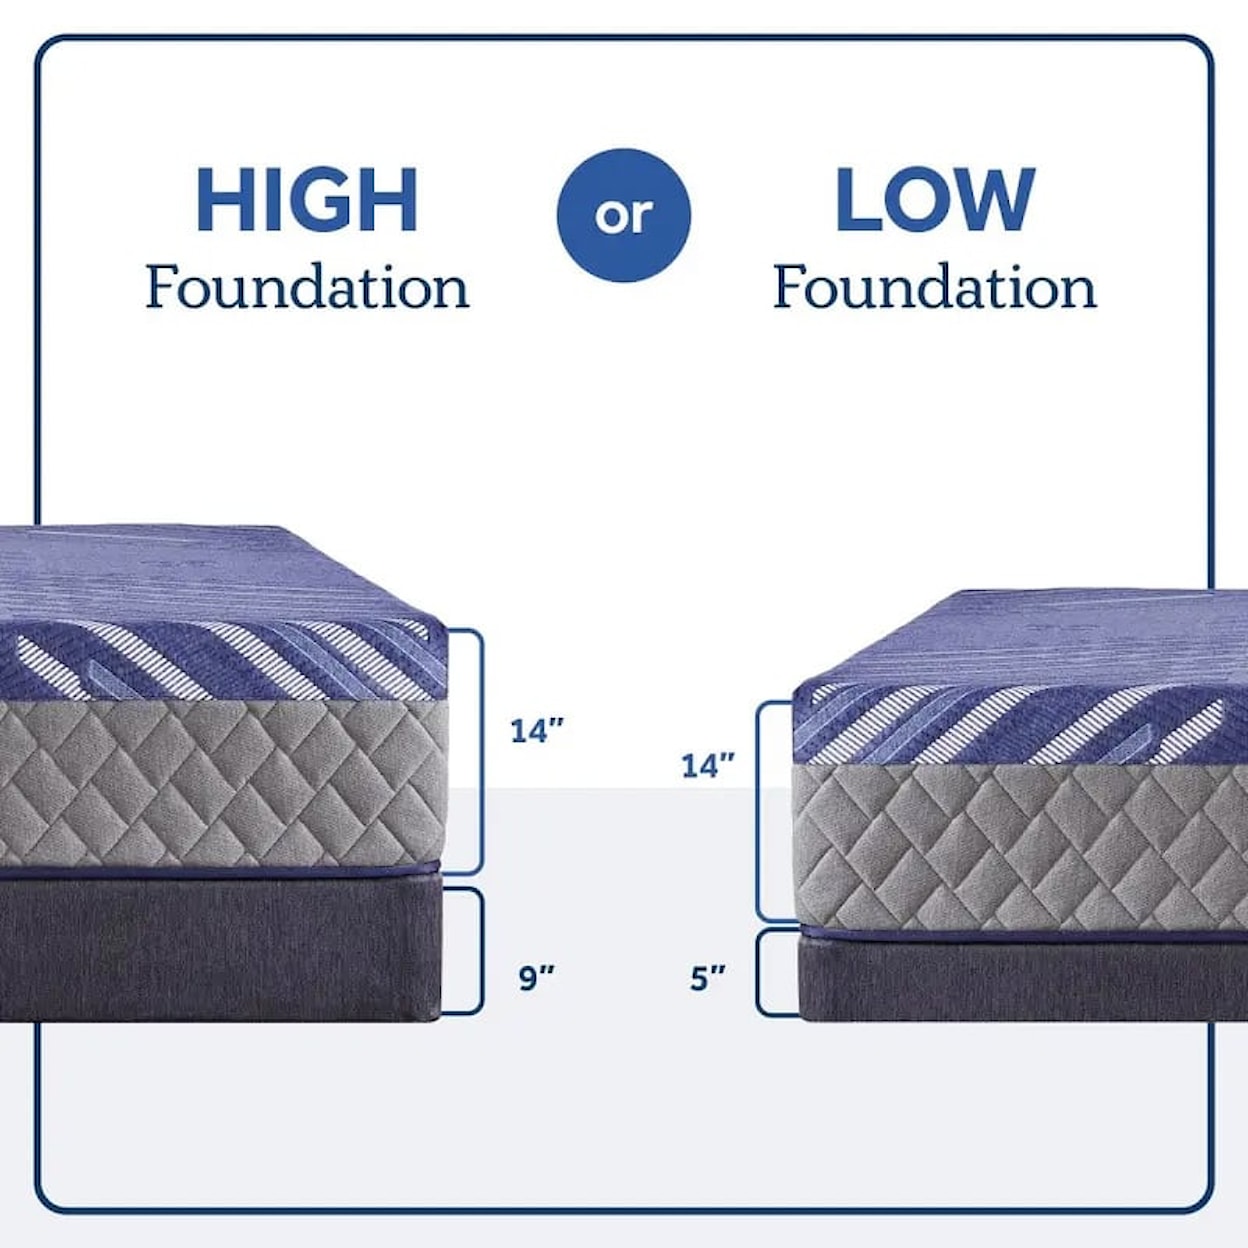 Sealy Sealy Grand Jewel Soft Hybrid Queen Mattress